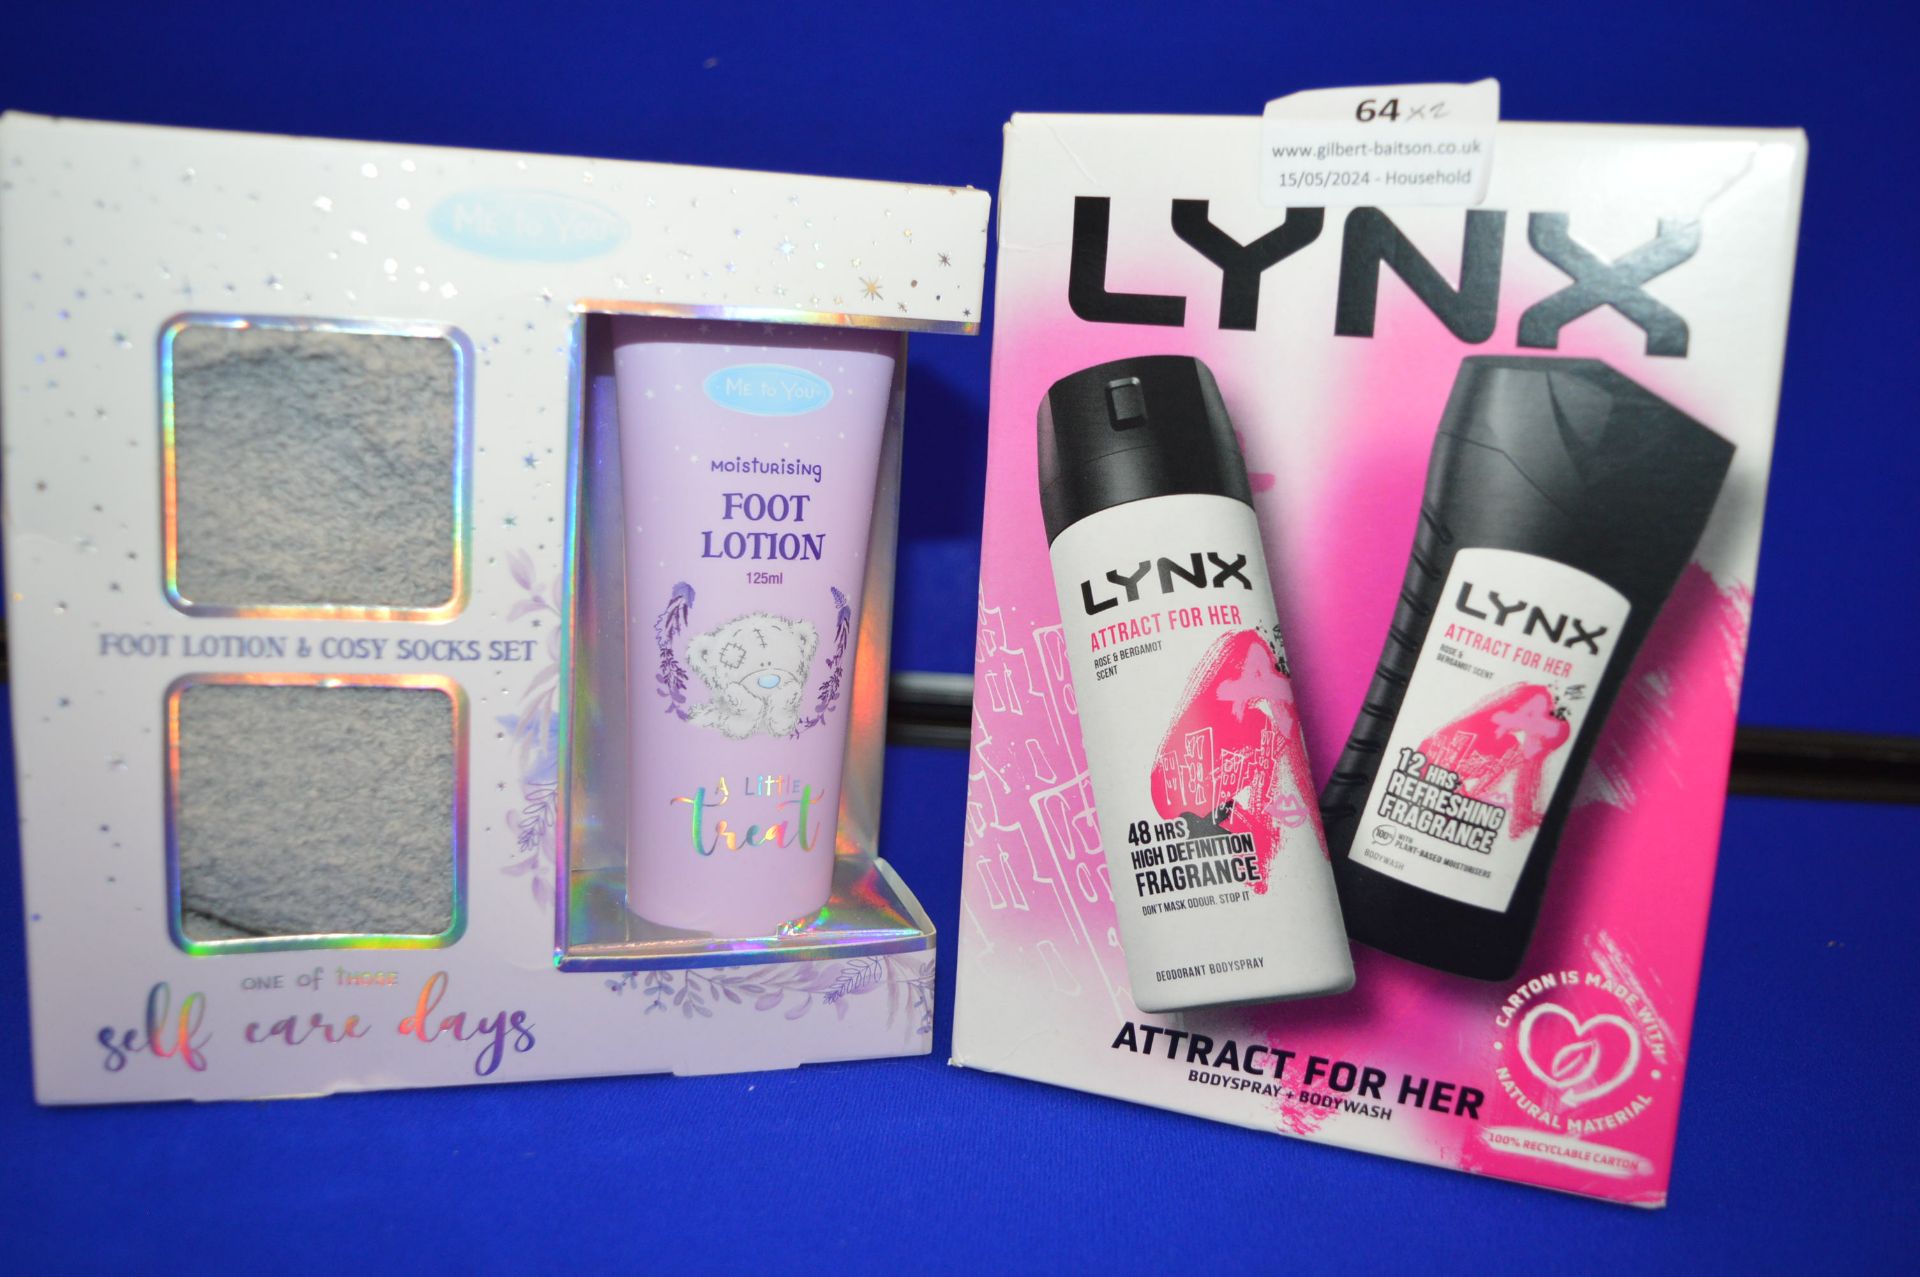 Lynx Attract for Her Toiletry Set plus Foot Lotion